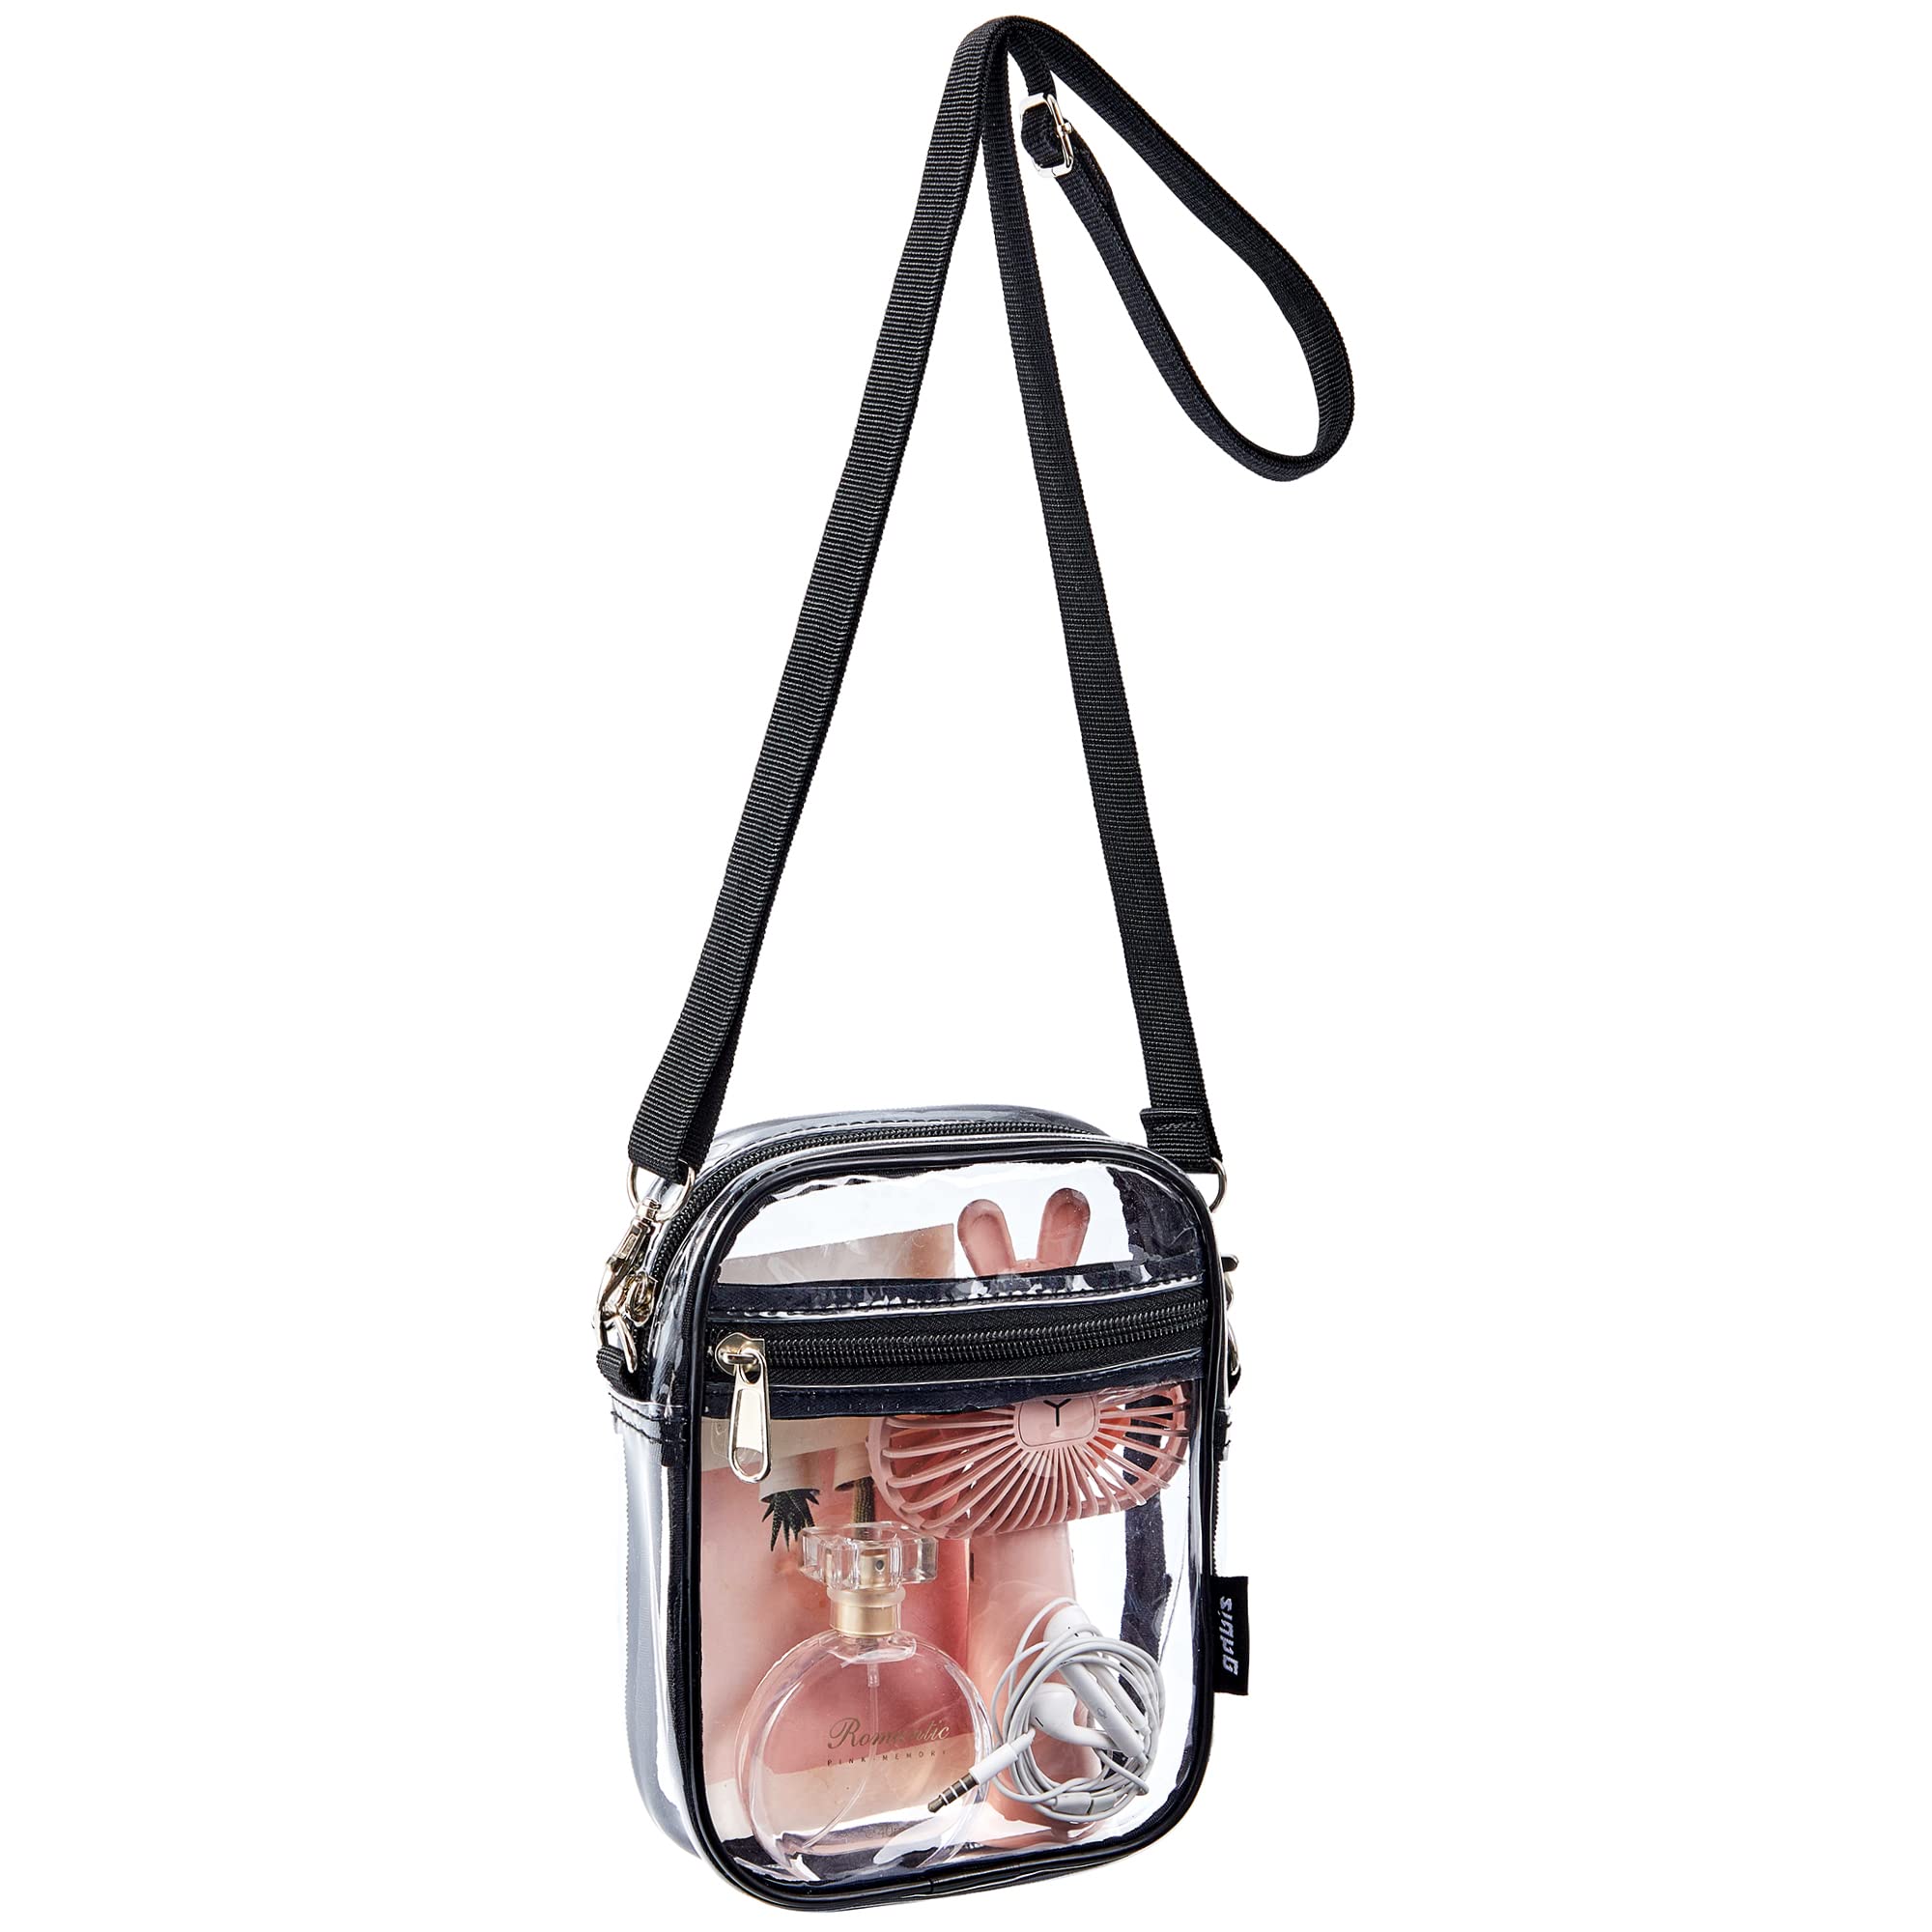 clear bag for stadium events lv